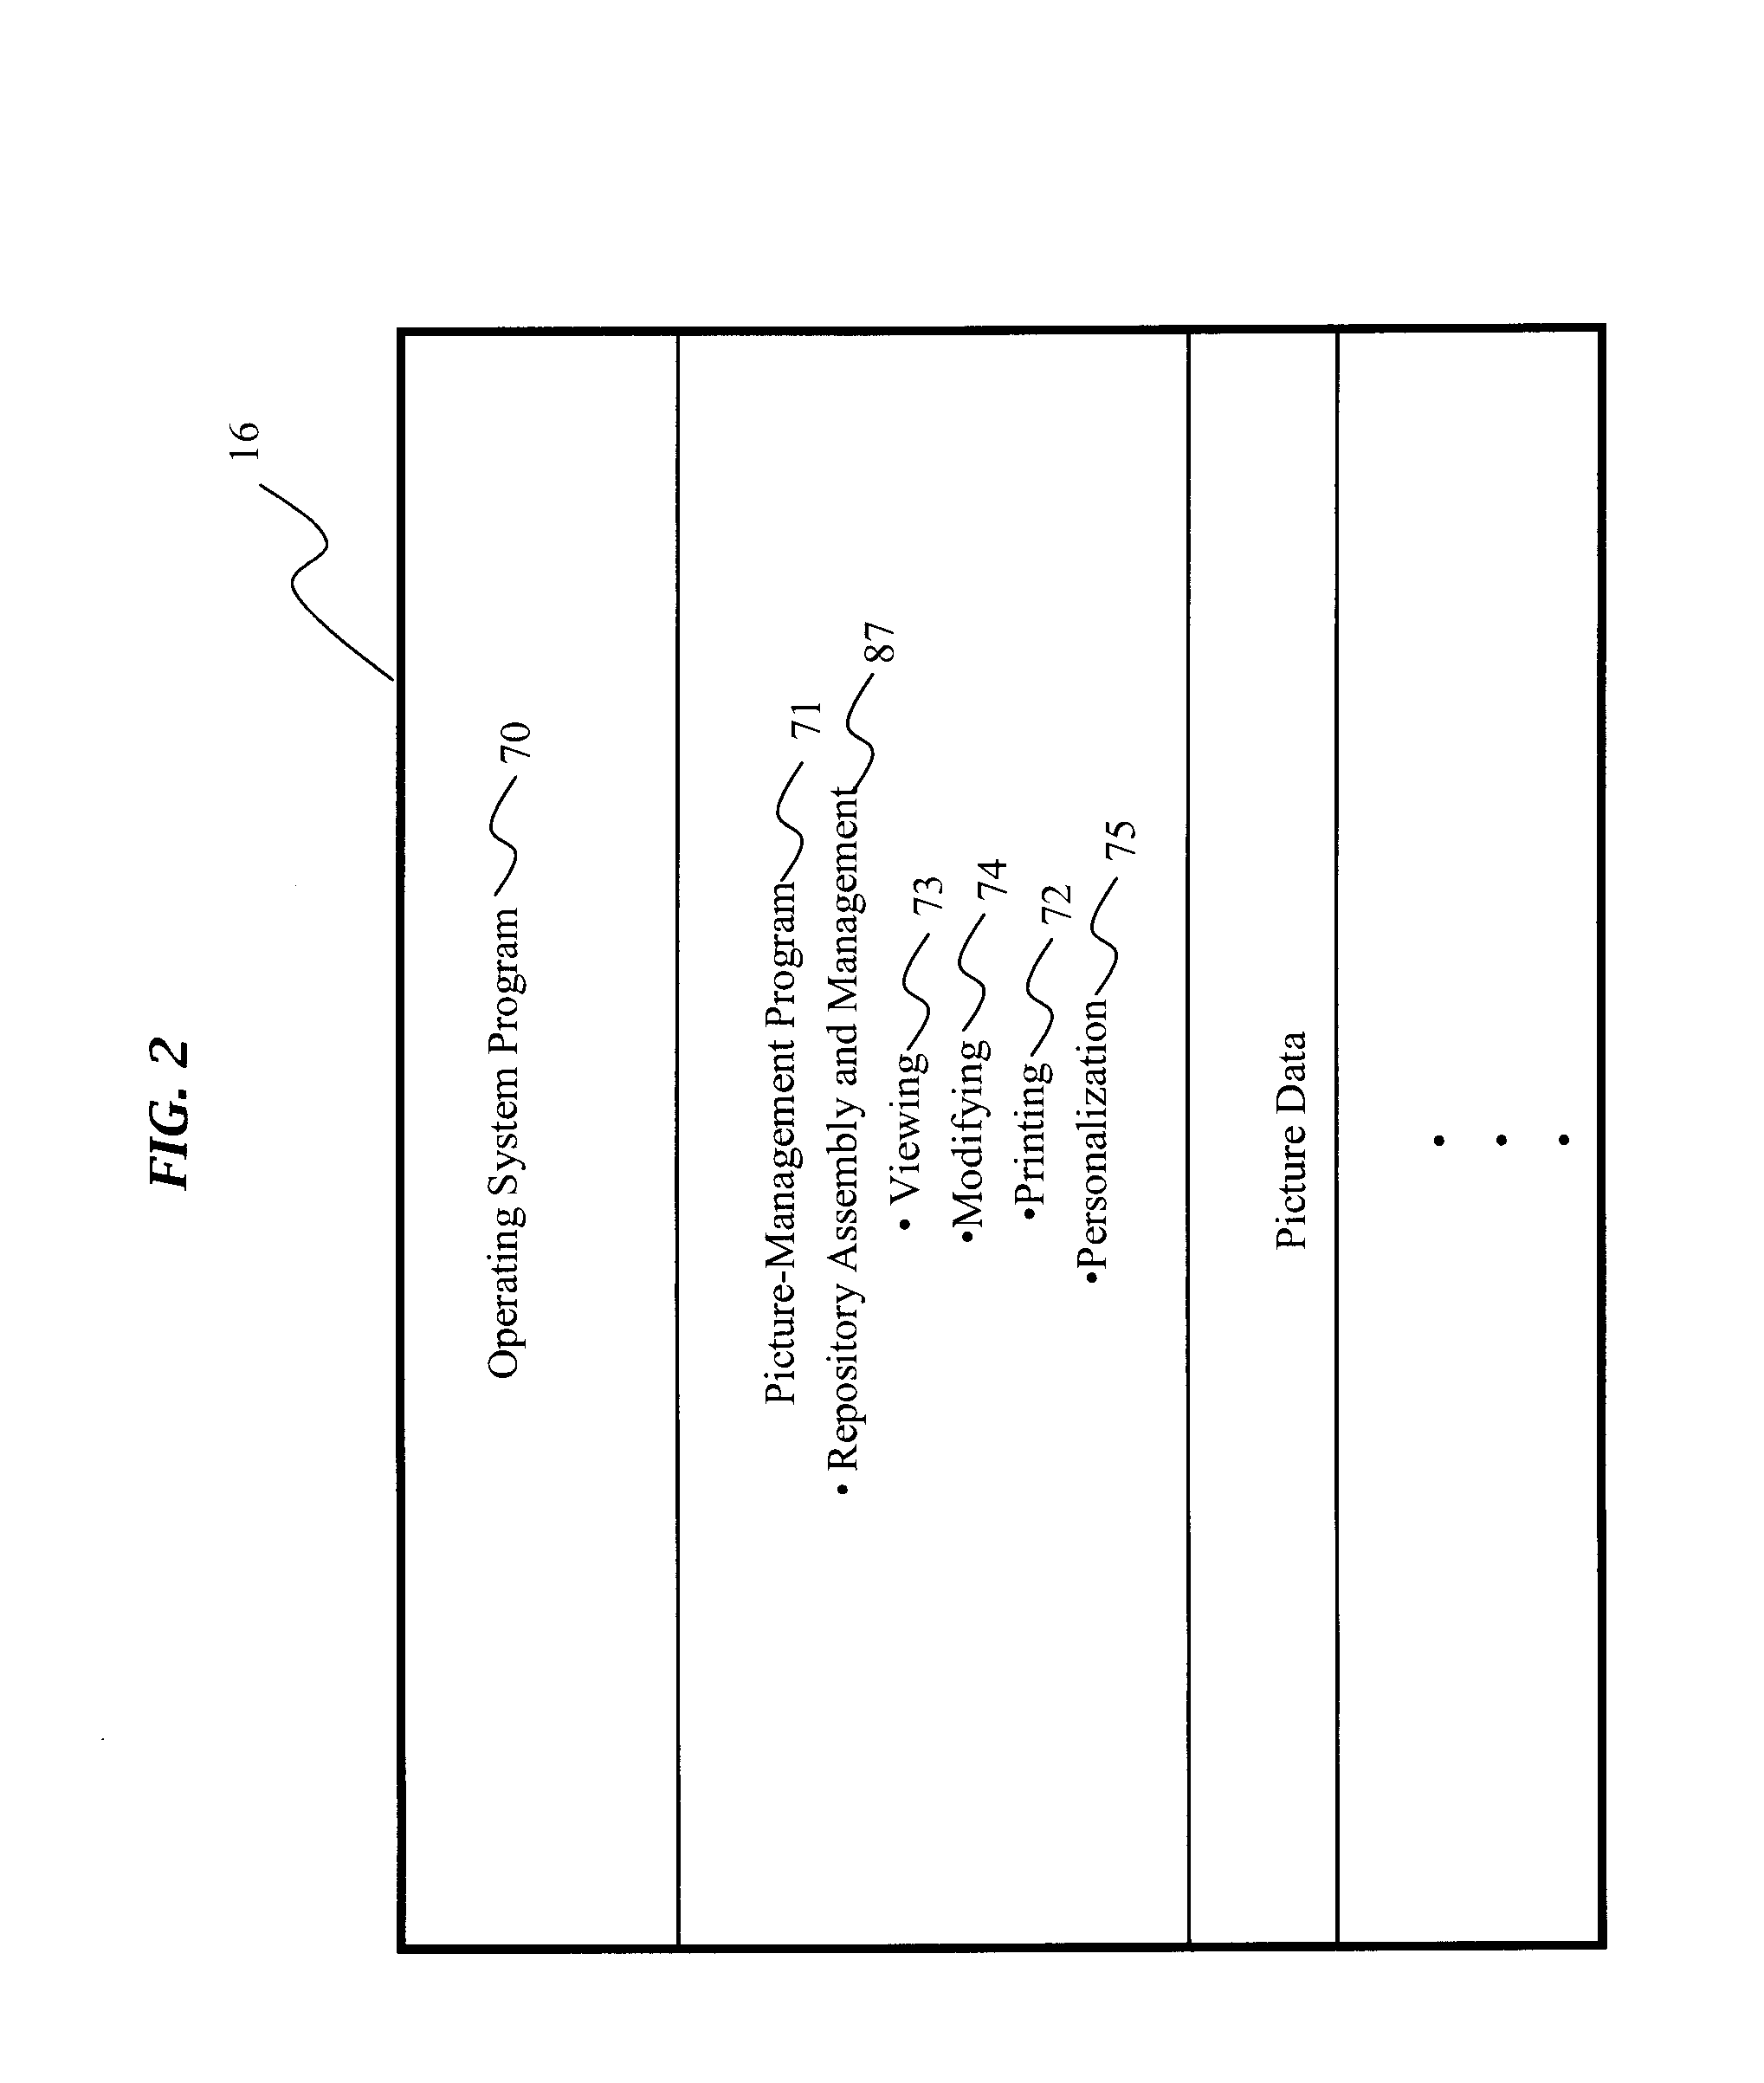 Integrated picture-management and printing apparatus